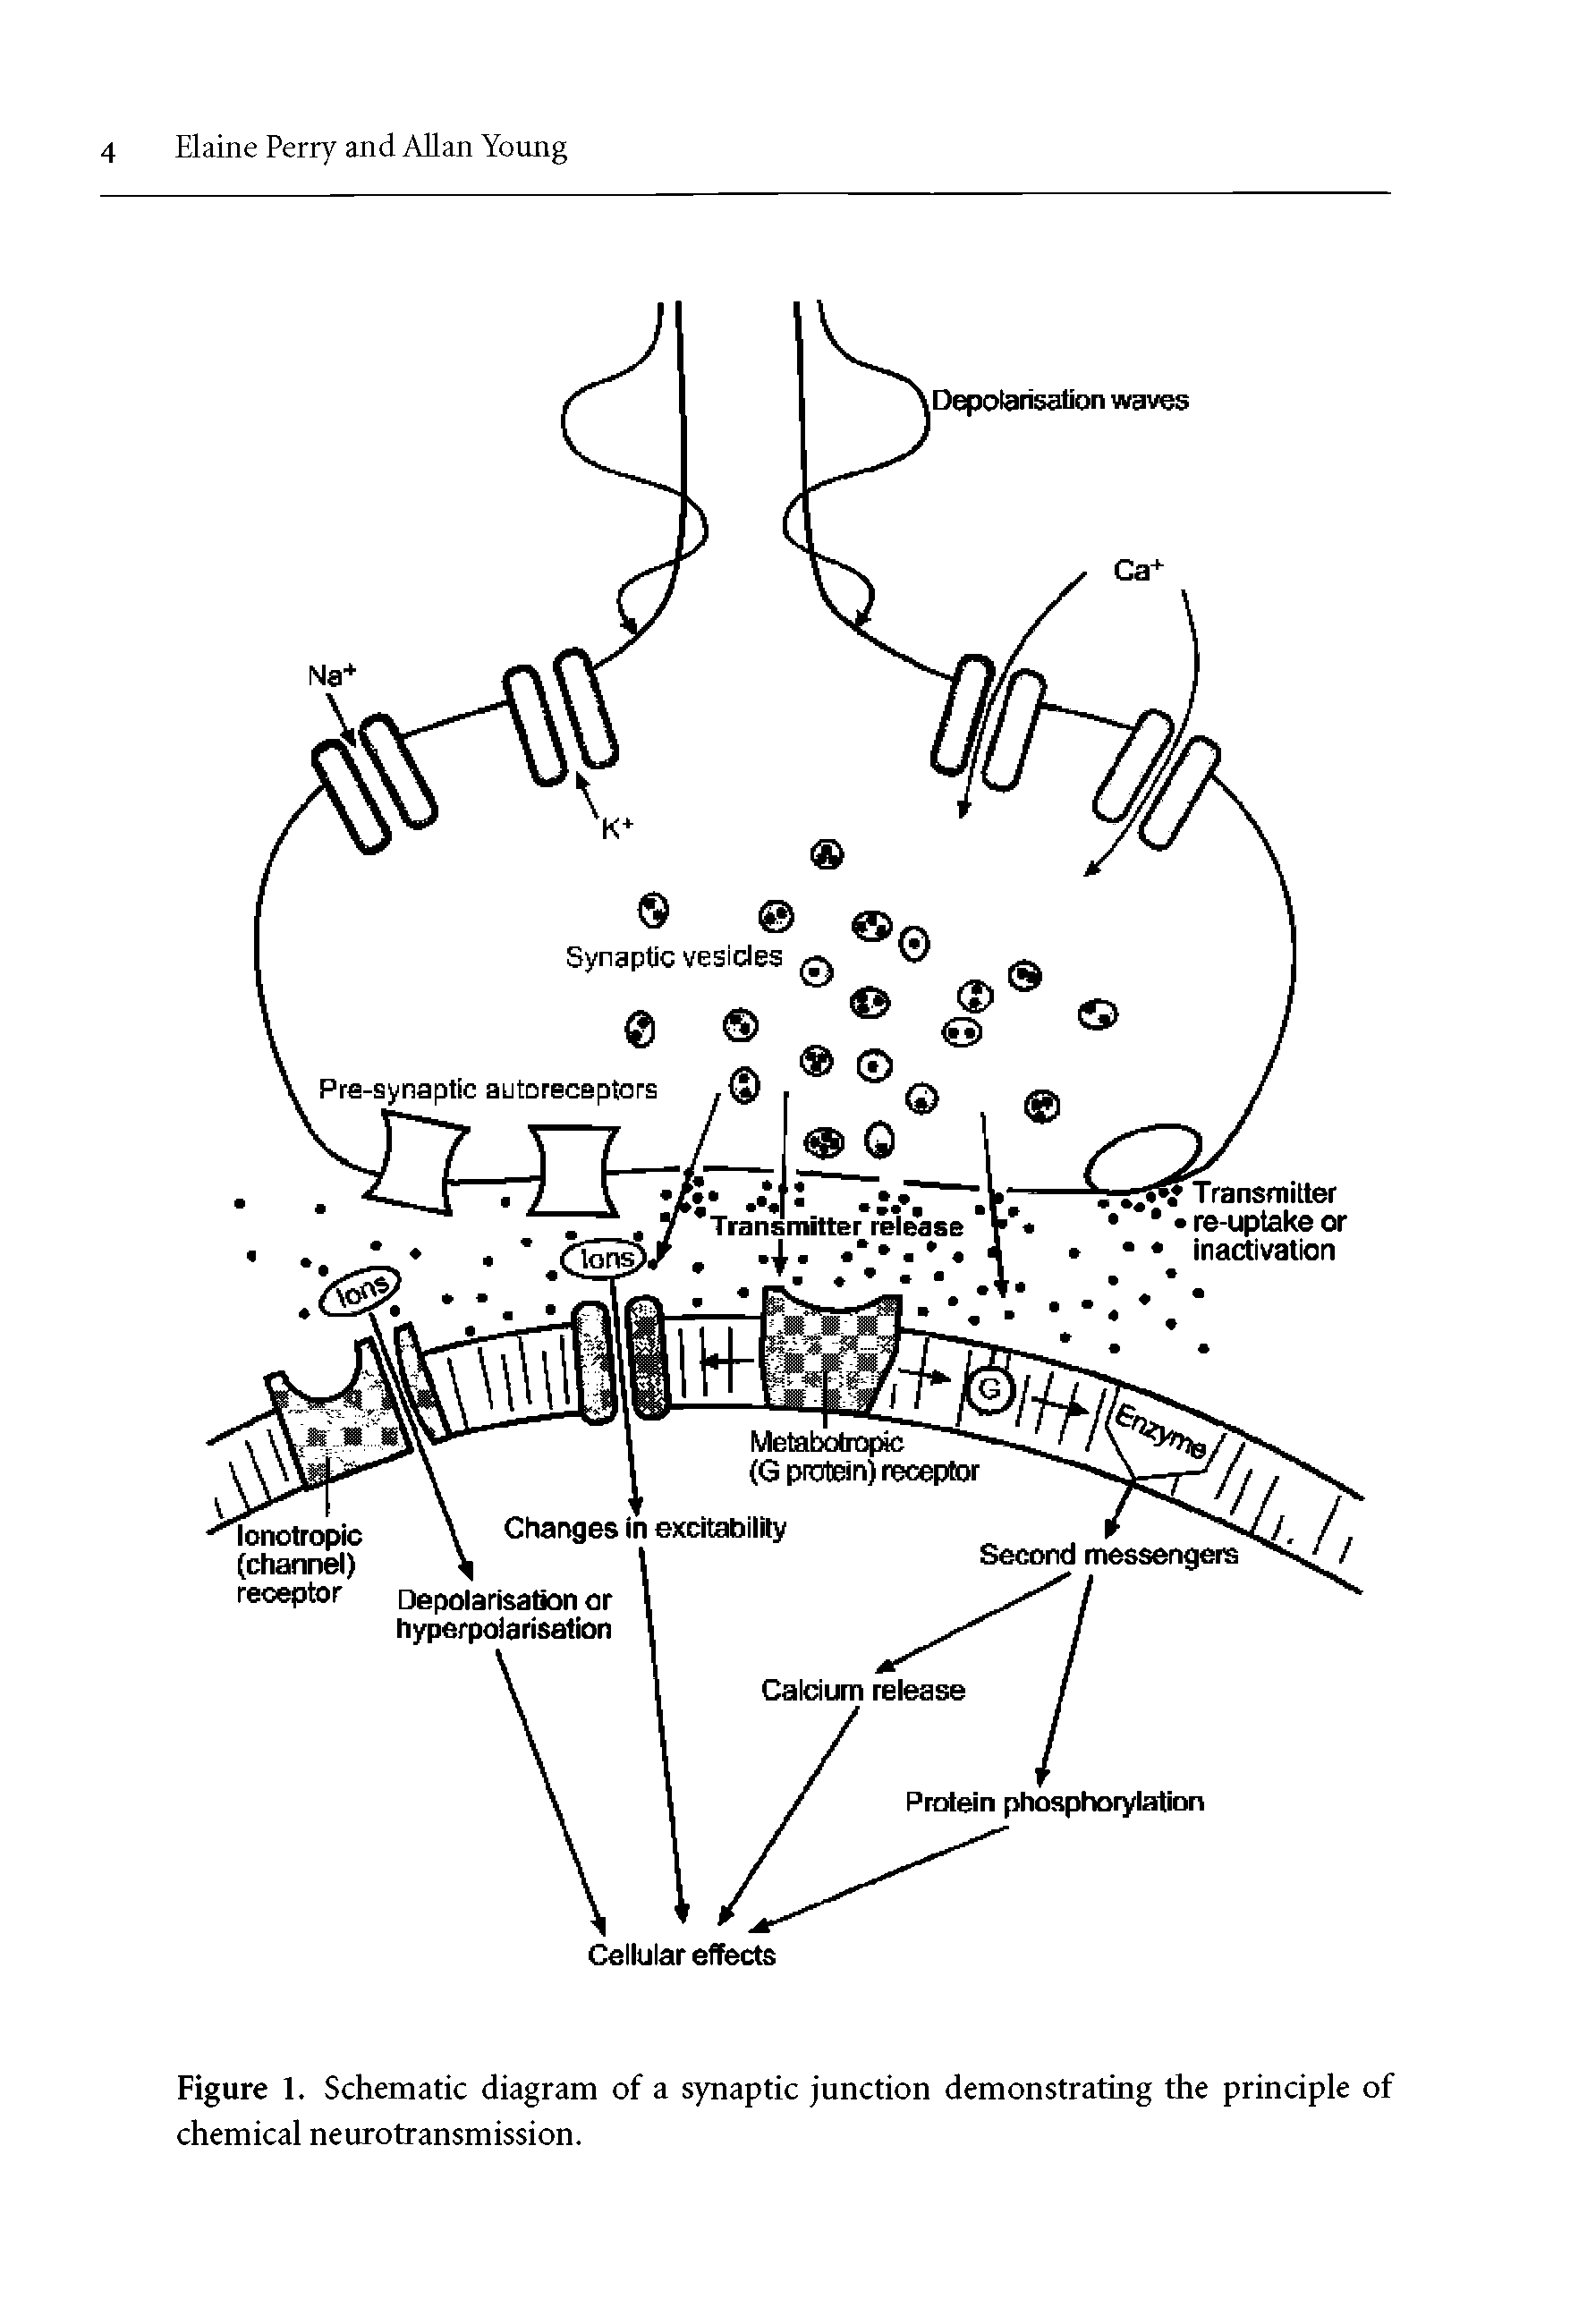 Figure 1. Schematic diagram of a synaptic junction demonstrating the principle of chemical neurotransmission.